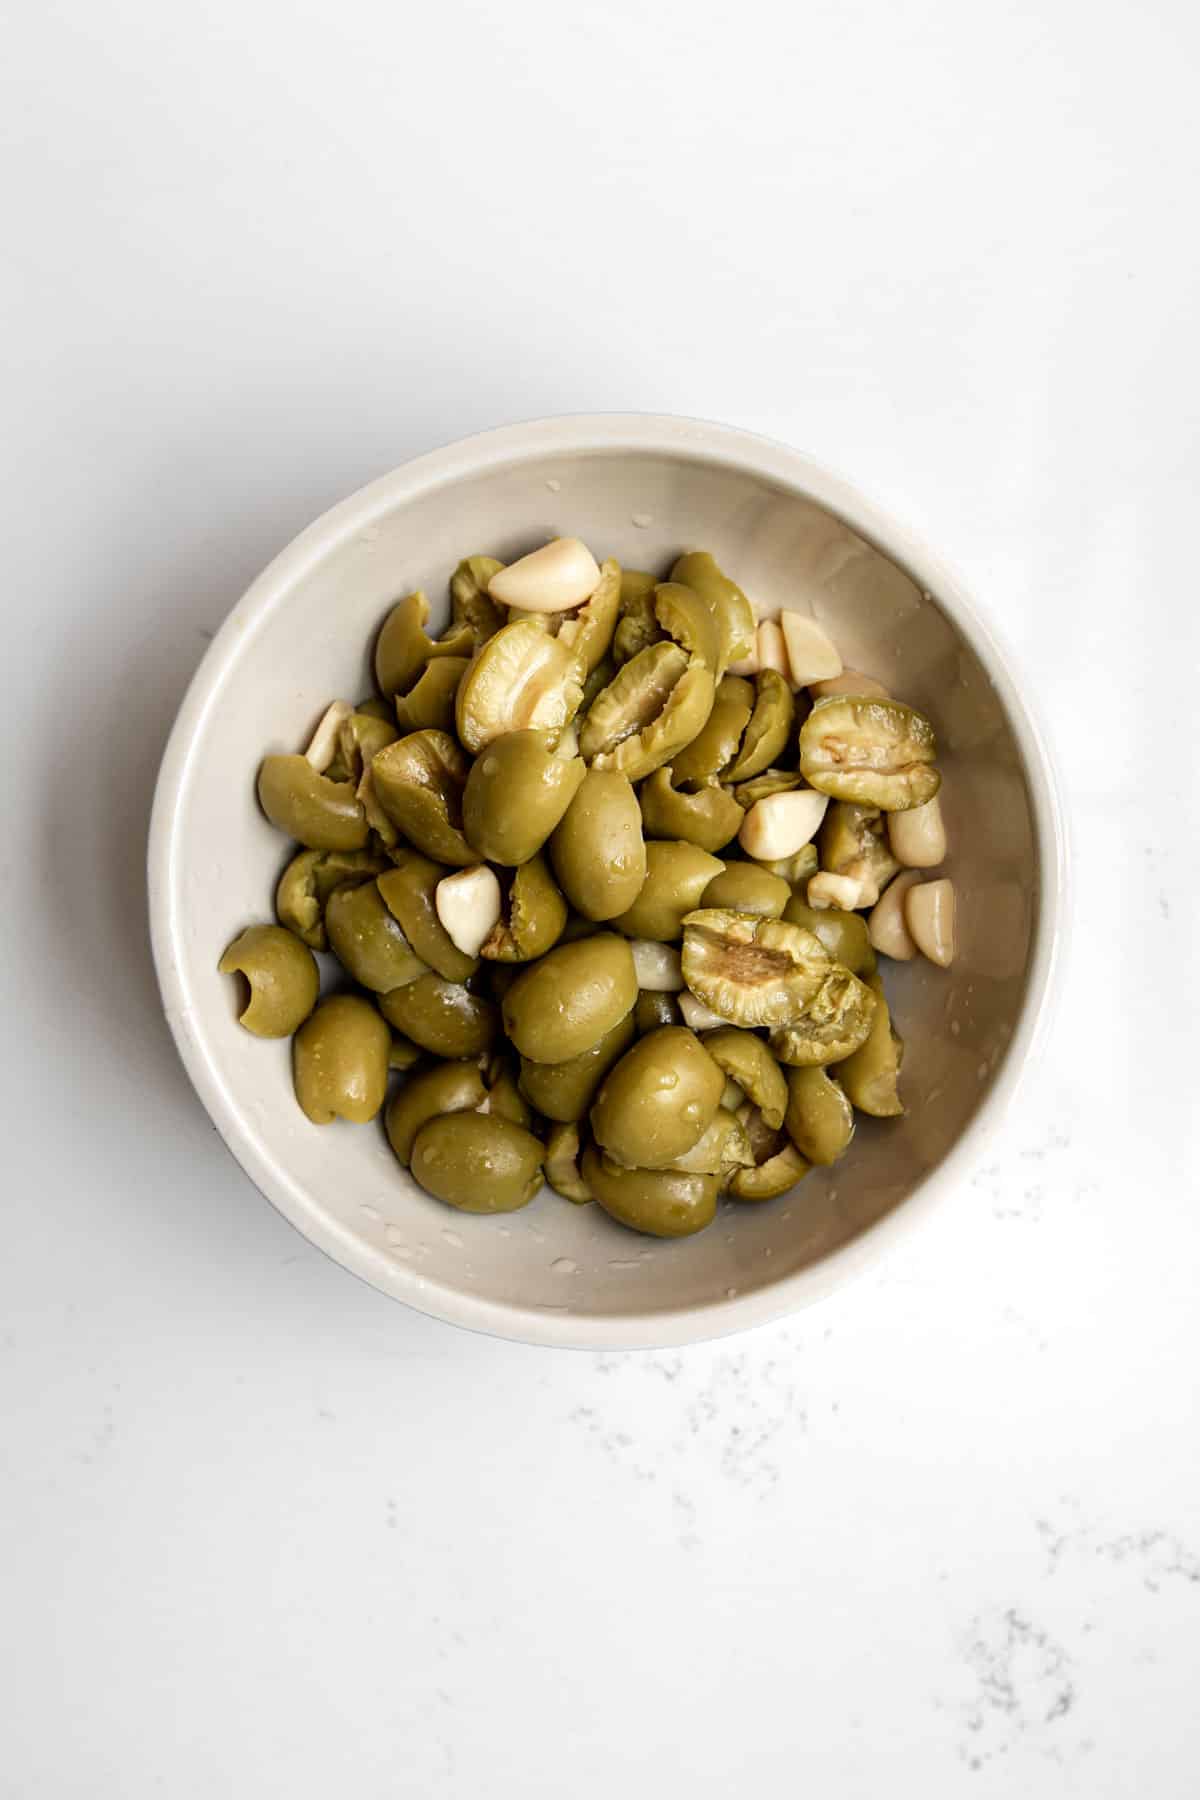 Beige bowl of olives torn with garlic cloves on a white table for radicchio salad.